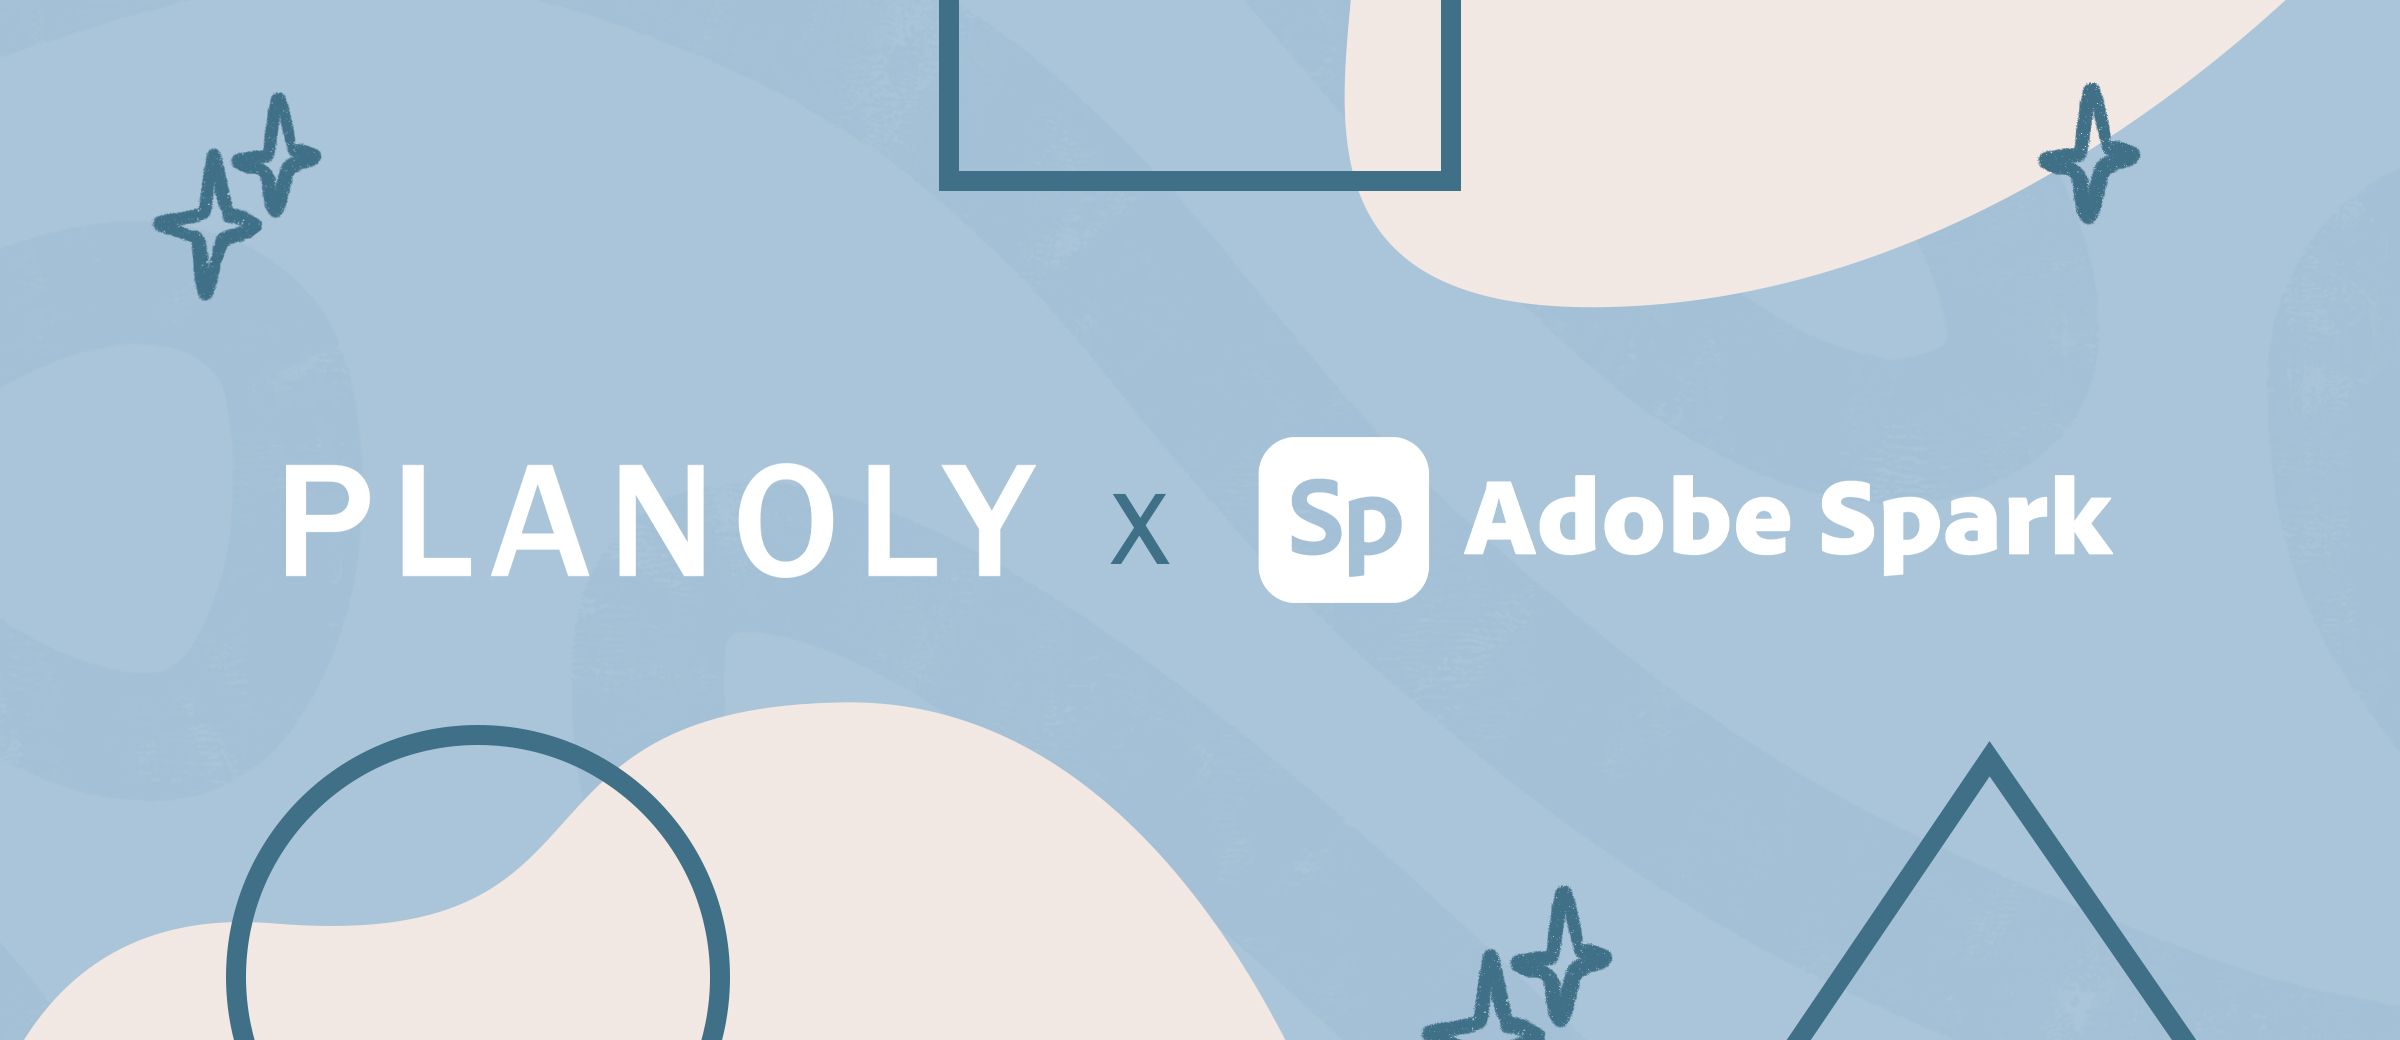 Plan, Create and Post with Adobe Spark and PLANOLY, by catherine-mitchell